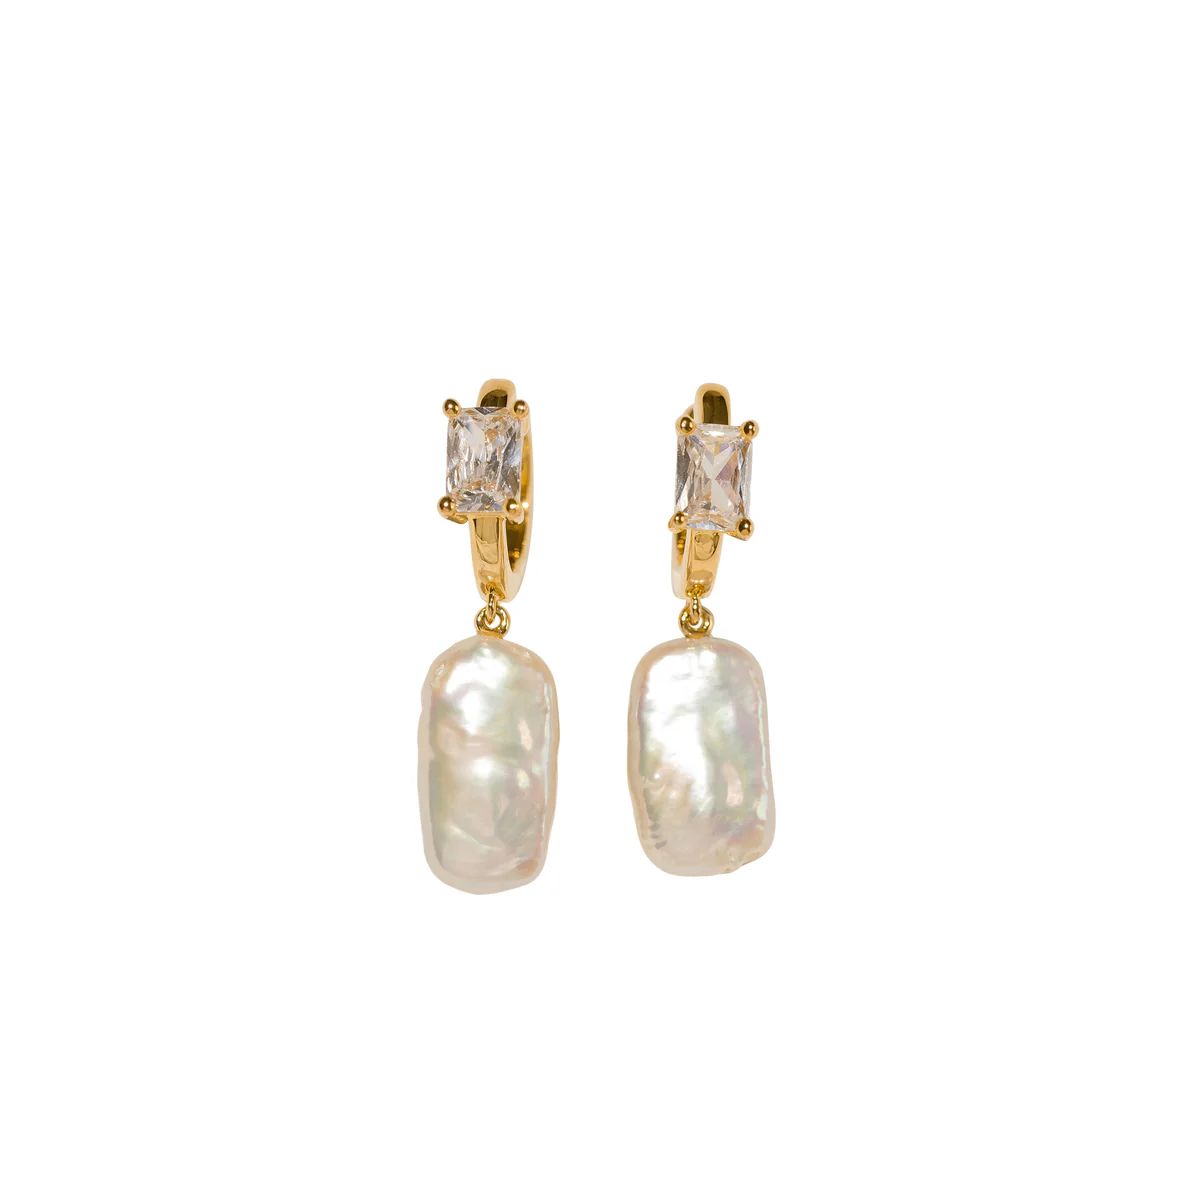 Forever Pearl Earrings | Erin Fader Jewelry Design